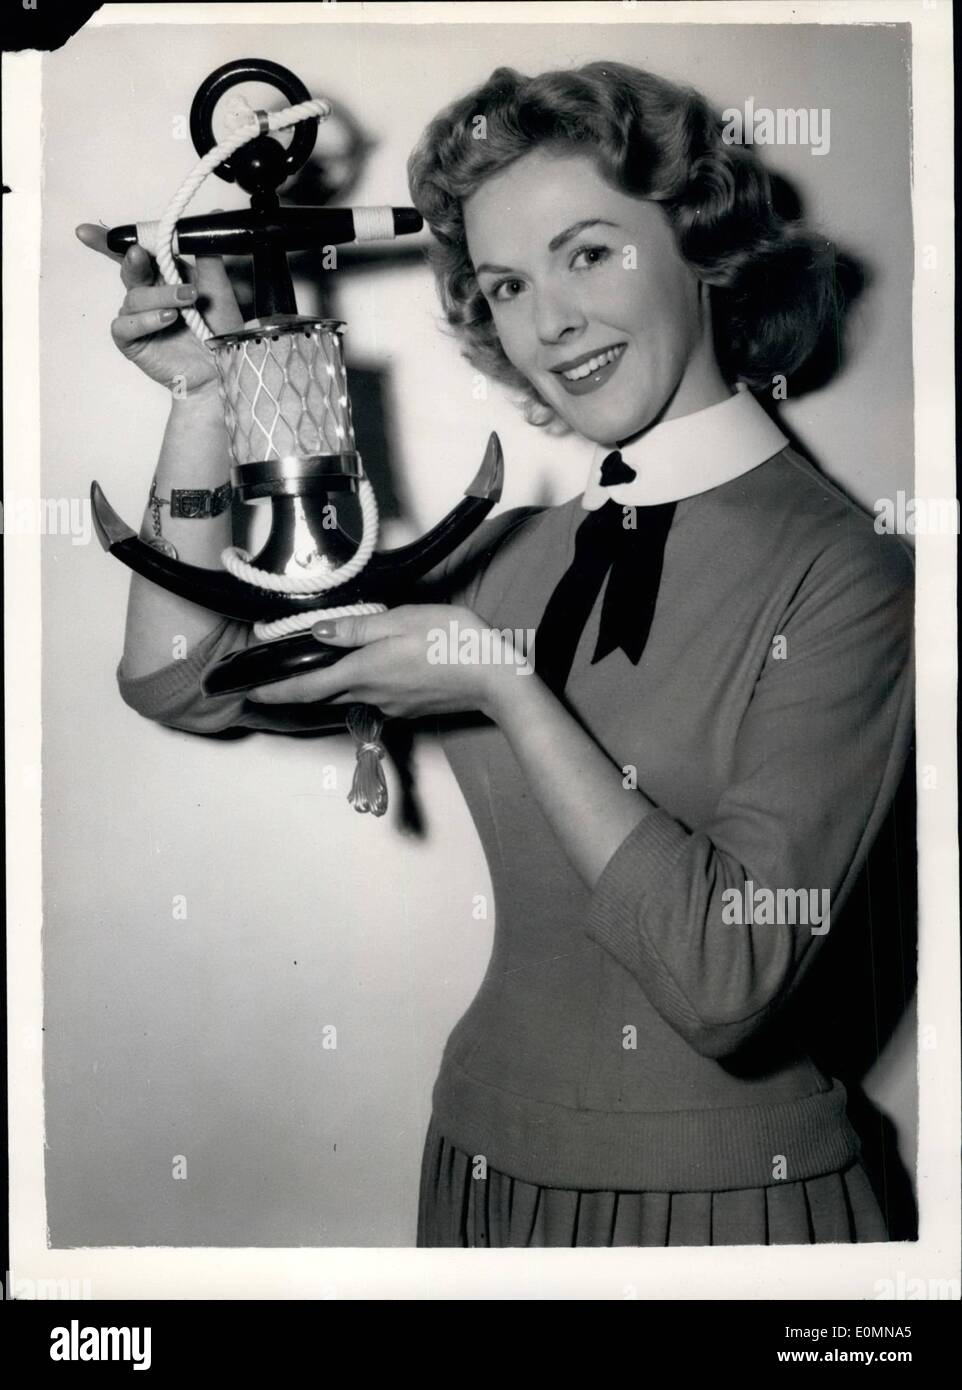 Jan. 01, 1956 - British Furniture Exhibition opens.. The 'Anchor' Table Lamp: Many new styles and designs were to be seen at the British Furniture Exhibition which opened this morning at Earls Court.. Picture Shows: Miss Pat Manwaring of Epsom, Surrey- admires a novel table lamp- in the shape of an anchor- at the exhibition this morning. Stock Photo